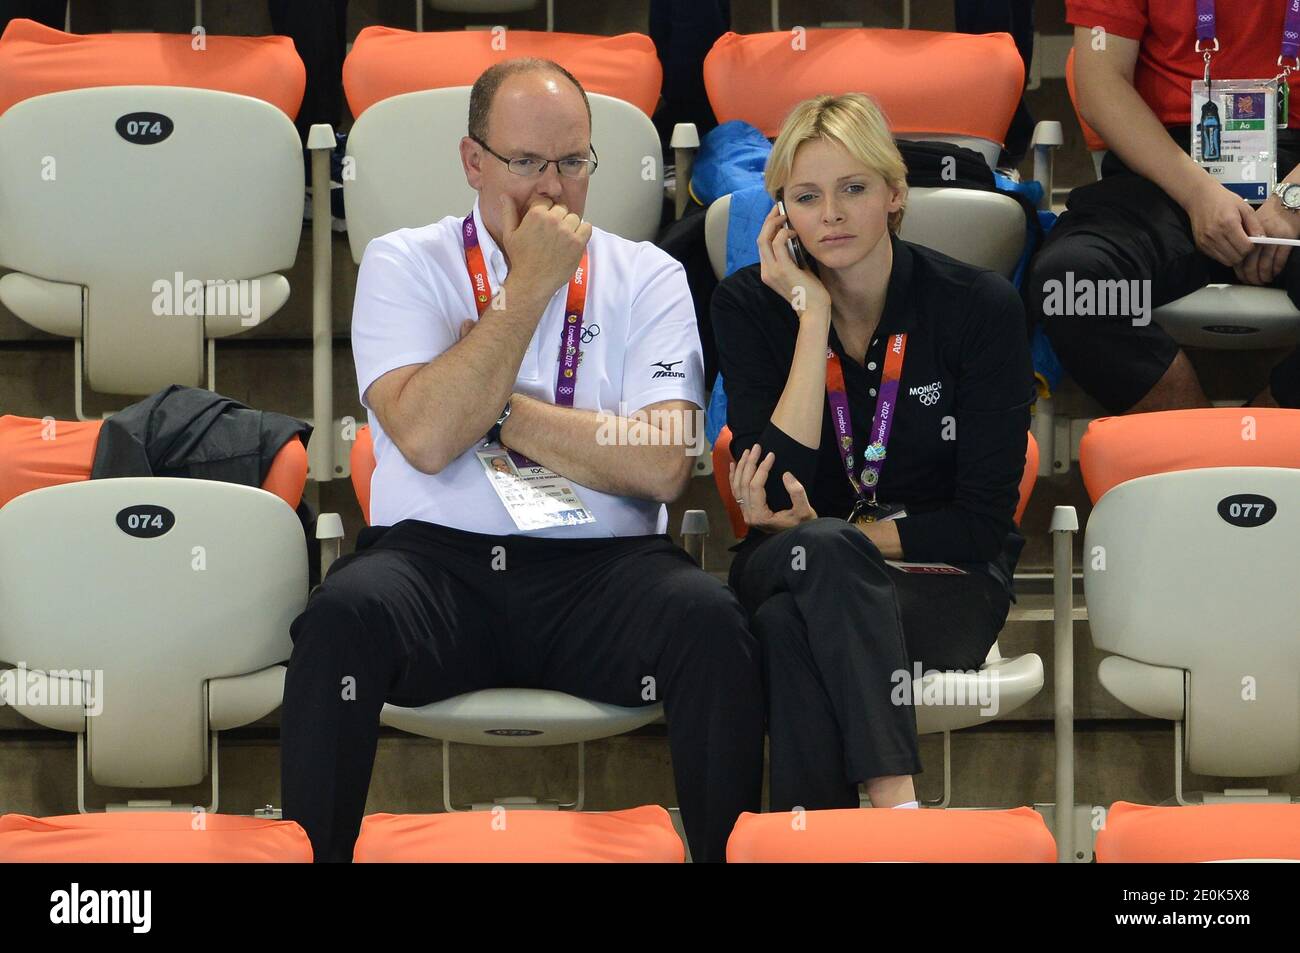 Princess Charlene of Monaco and Prince Albert II of Monaco attend swimming final session at the aquatic center during the 2012 London Olympics on August 31, 2012. Photo by Gouhier-Guibbaud-JMP/ABACAPRESS.COM Stock Photo